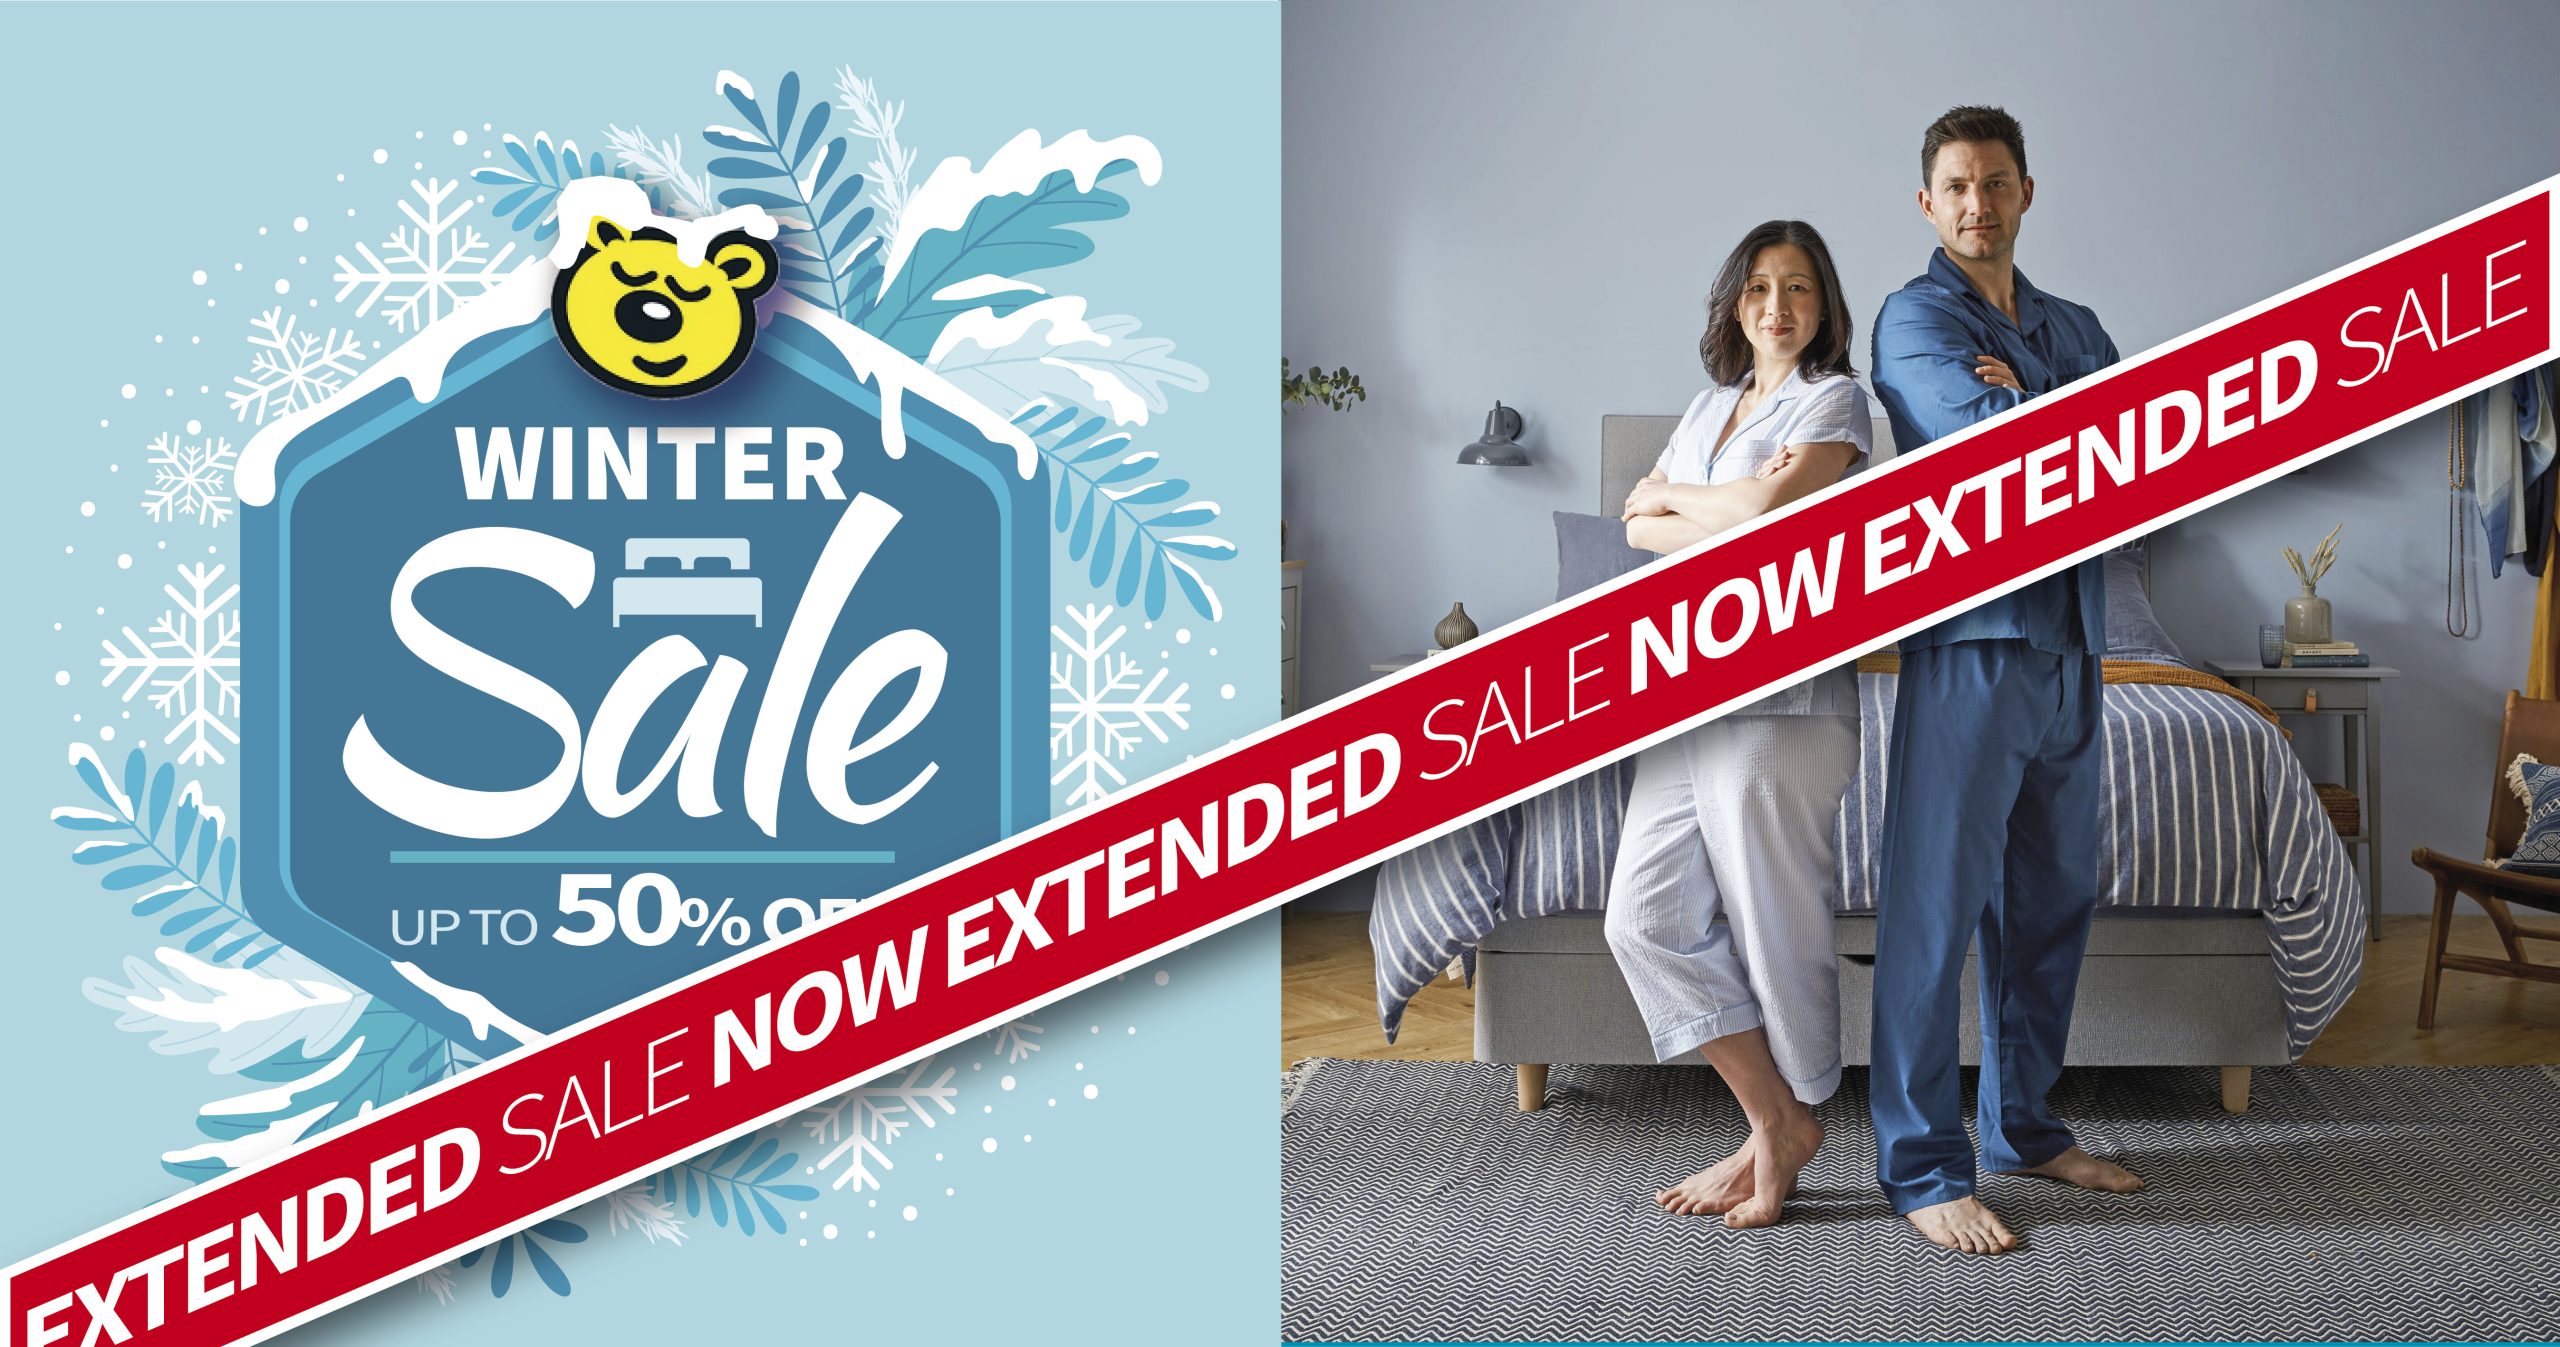 Winter Bed Sale EXTENDED